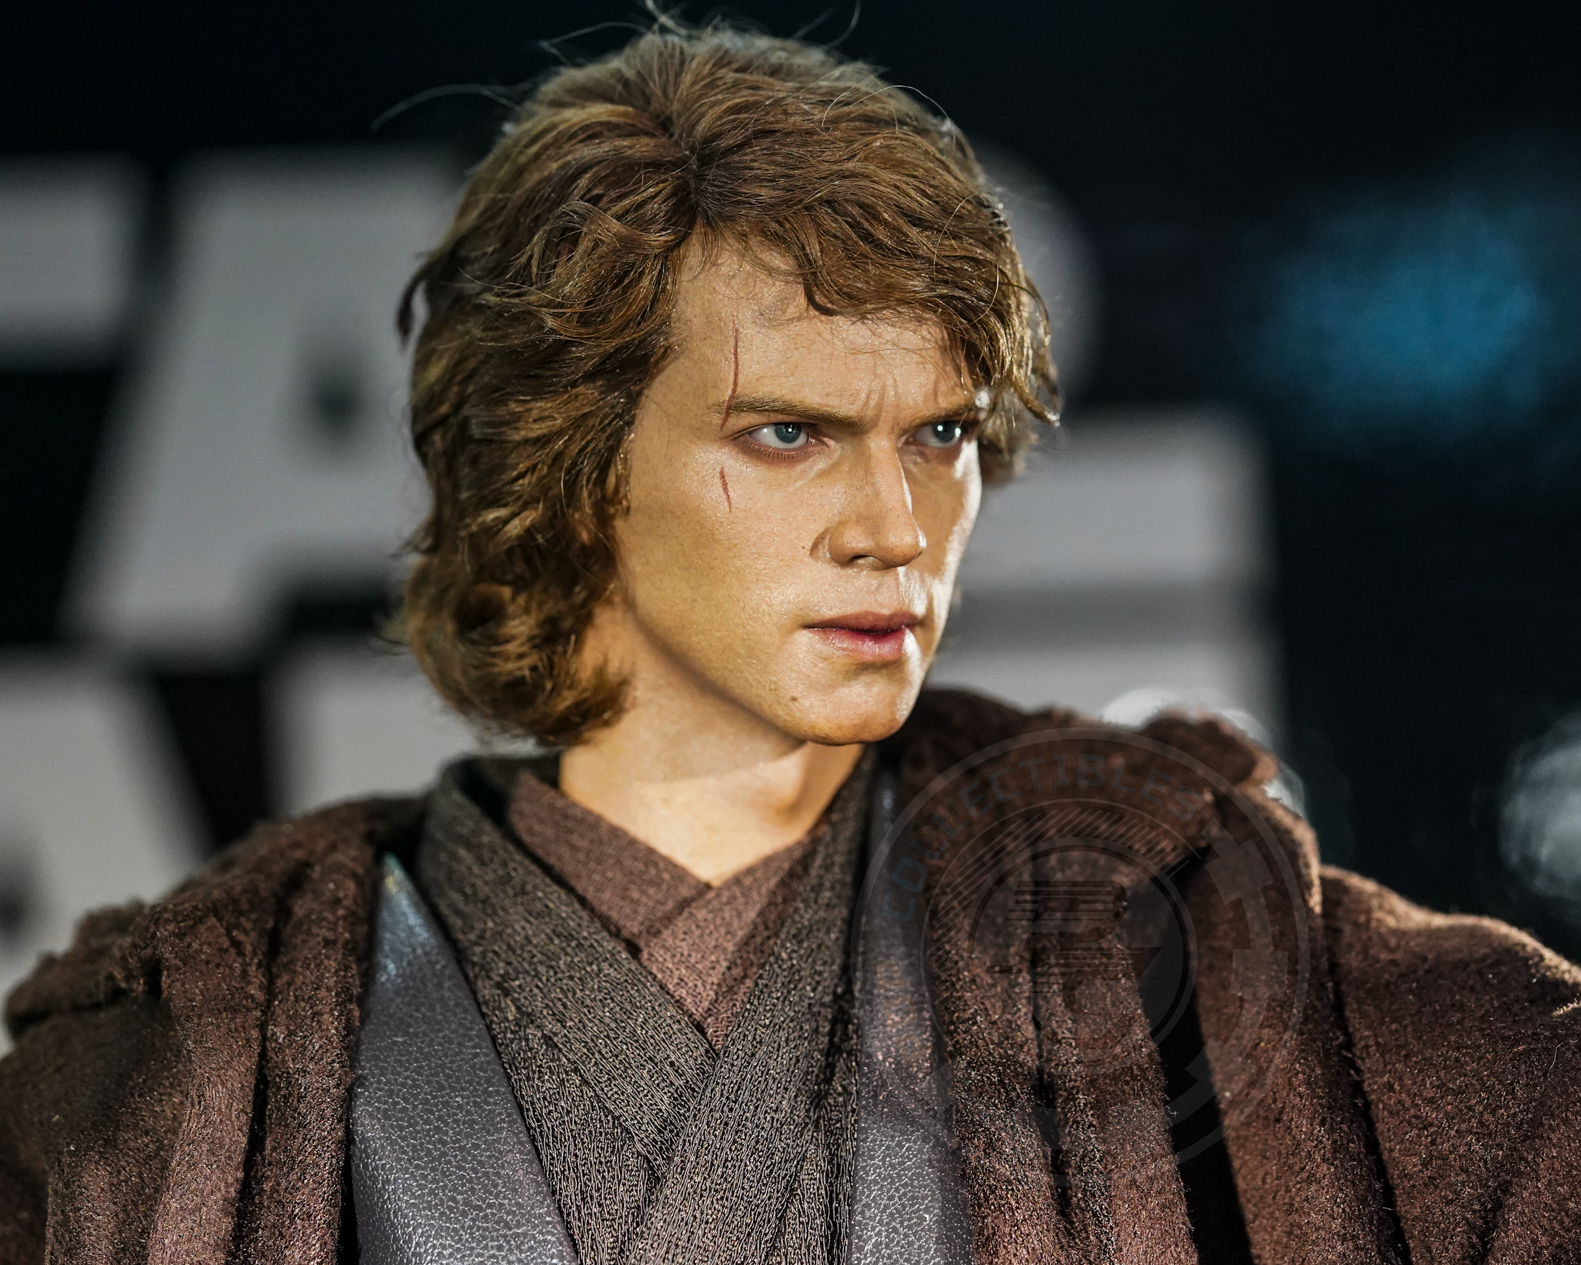 newproduct - NEW PRODUCT: HOT TOYS: STAR WARS EPISODE III: REVENGE OF THE SITH™ ANAKIN SKYWALKER™ 1/6TH SCALE COLLECTIBLE FIGURE - Page 7 DSC03930-2_1024x1024@2x